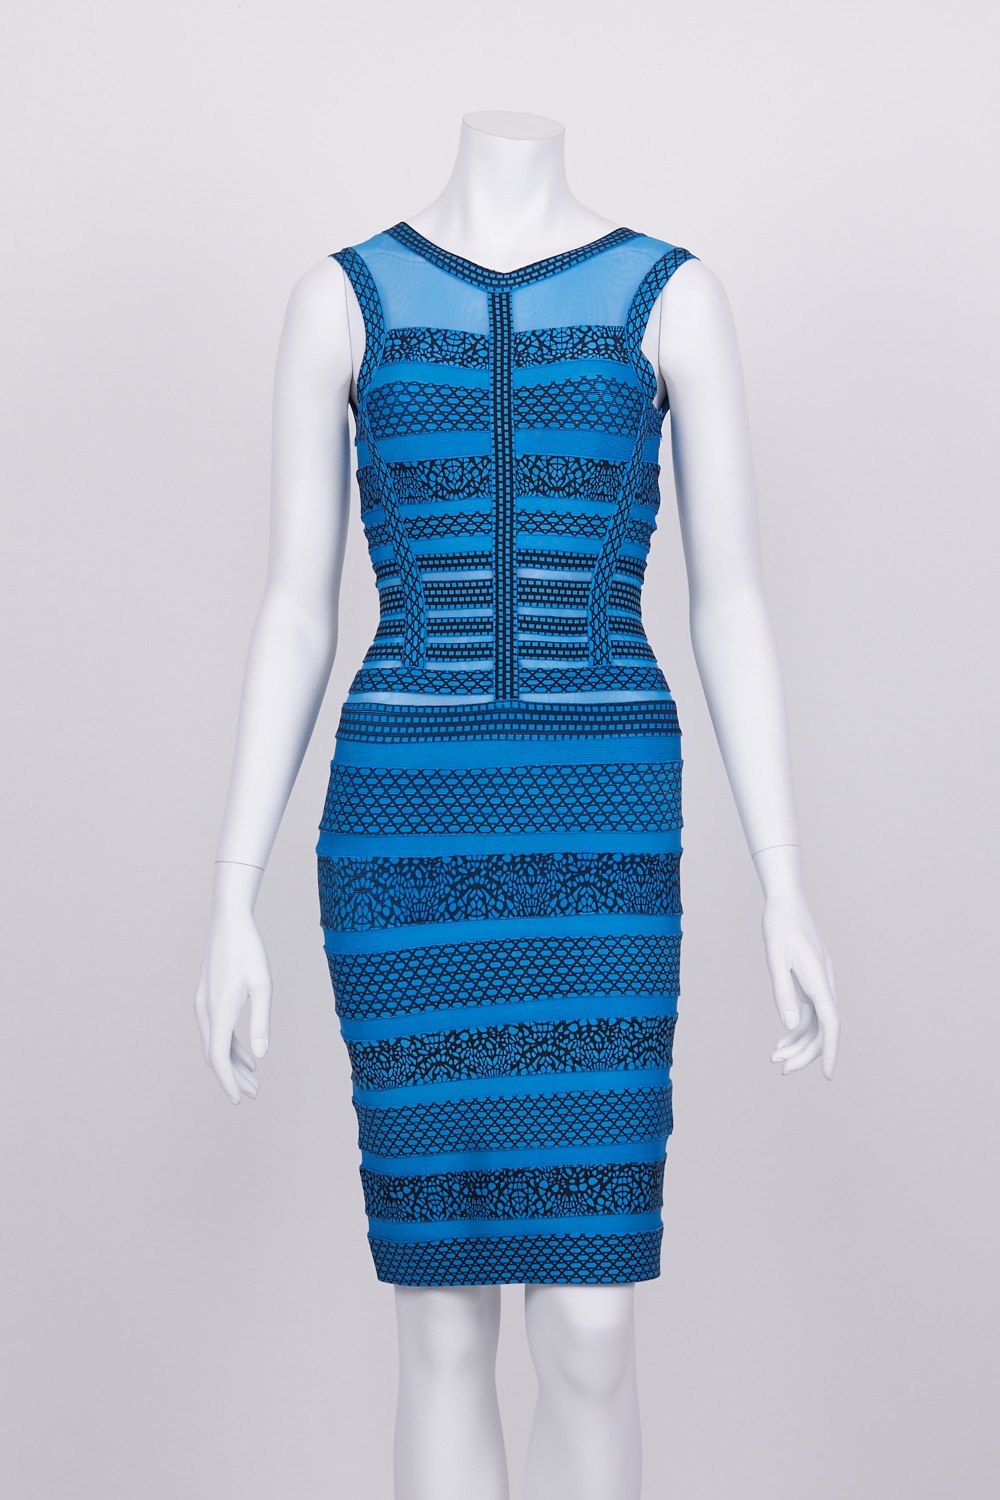 Blockout Blue And Black Patterned Bodycon Dress S